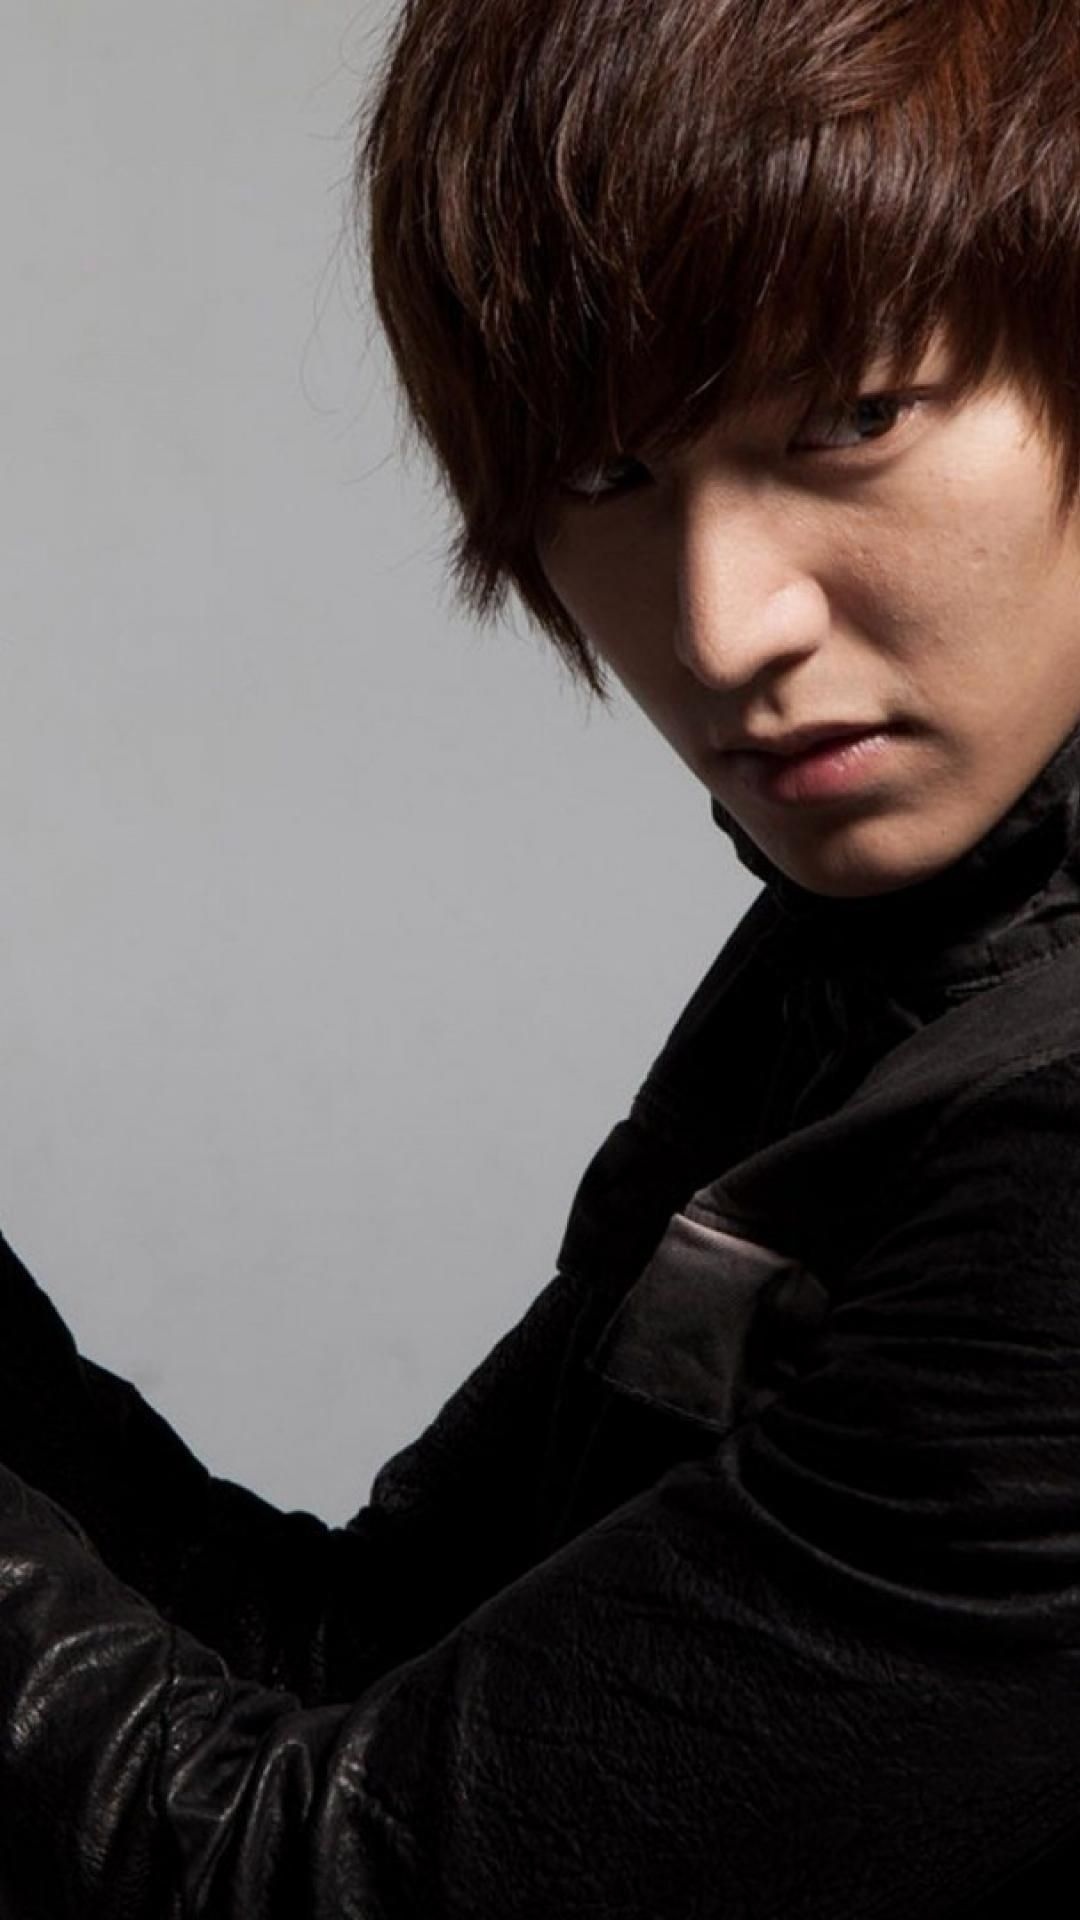 Lee Min-ho: One of the most popular actors not just in Korea but also worldwide. 1080x1920 Full HD Wallpaper.